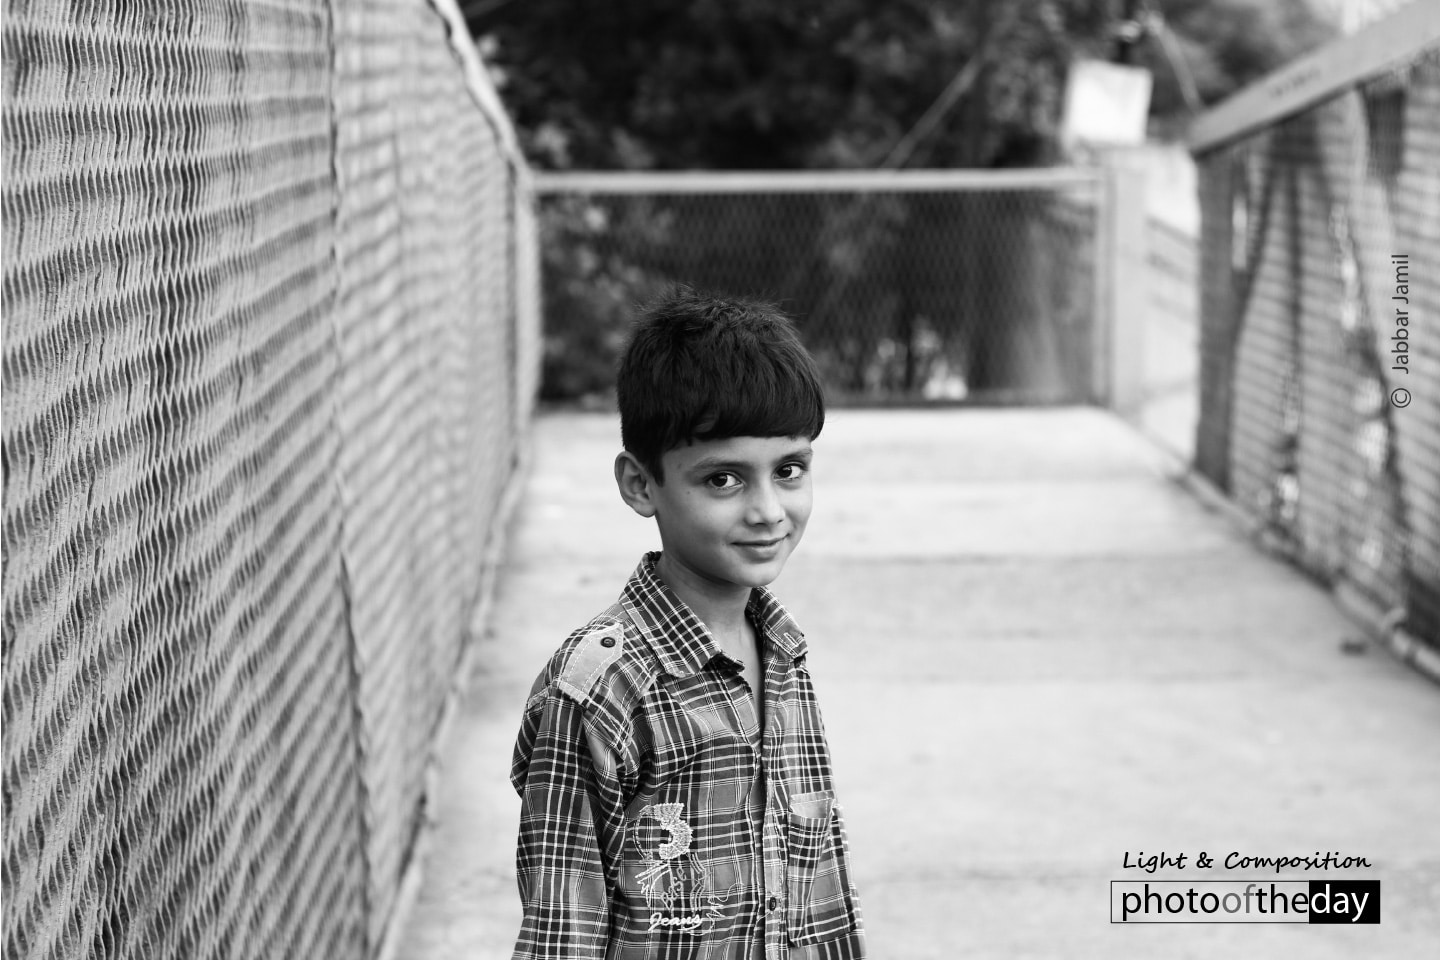 He Wanted to Be Photographed, by Jabbar Jamil